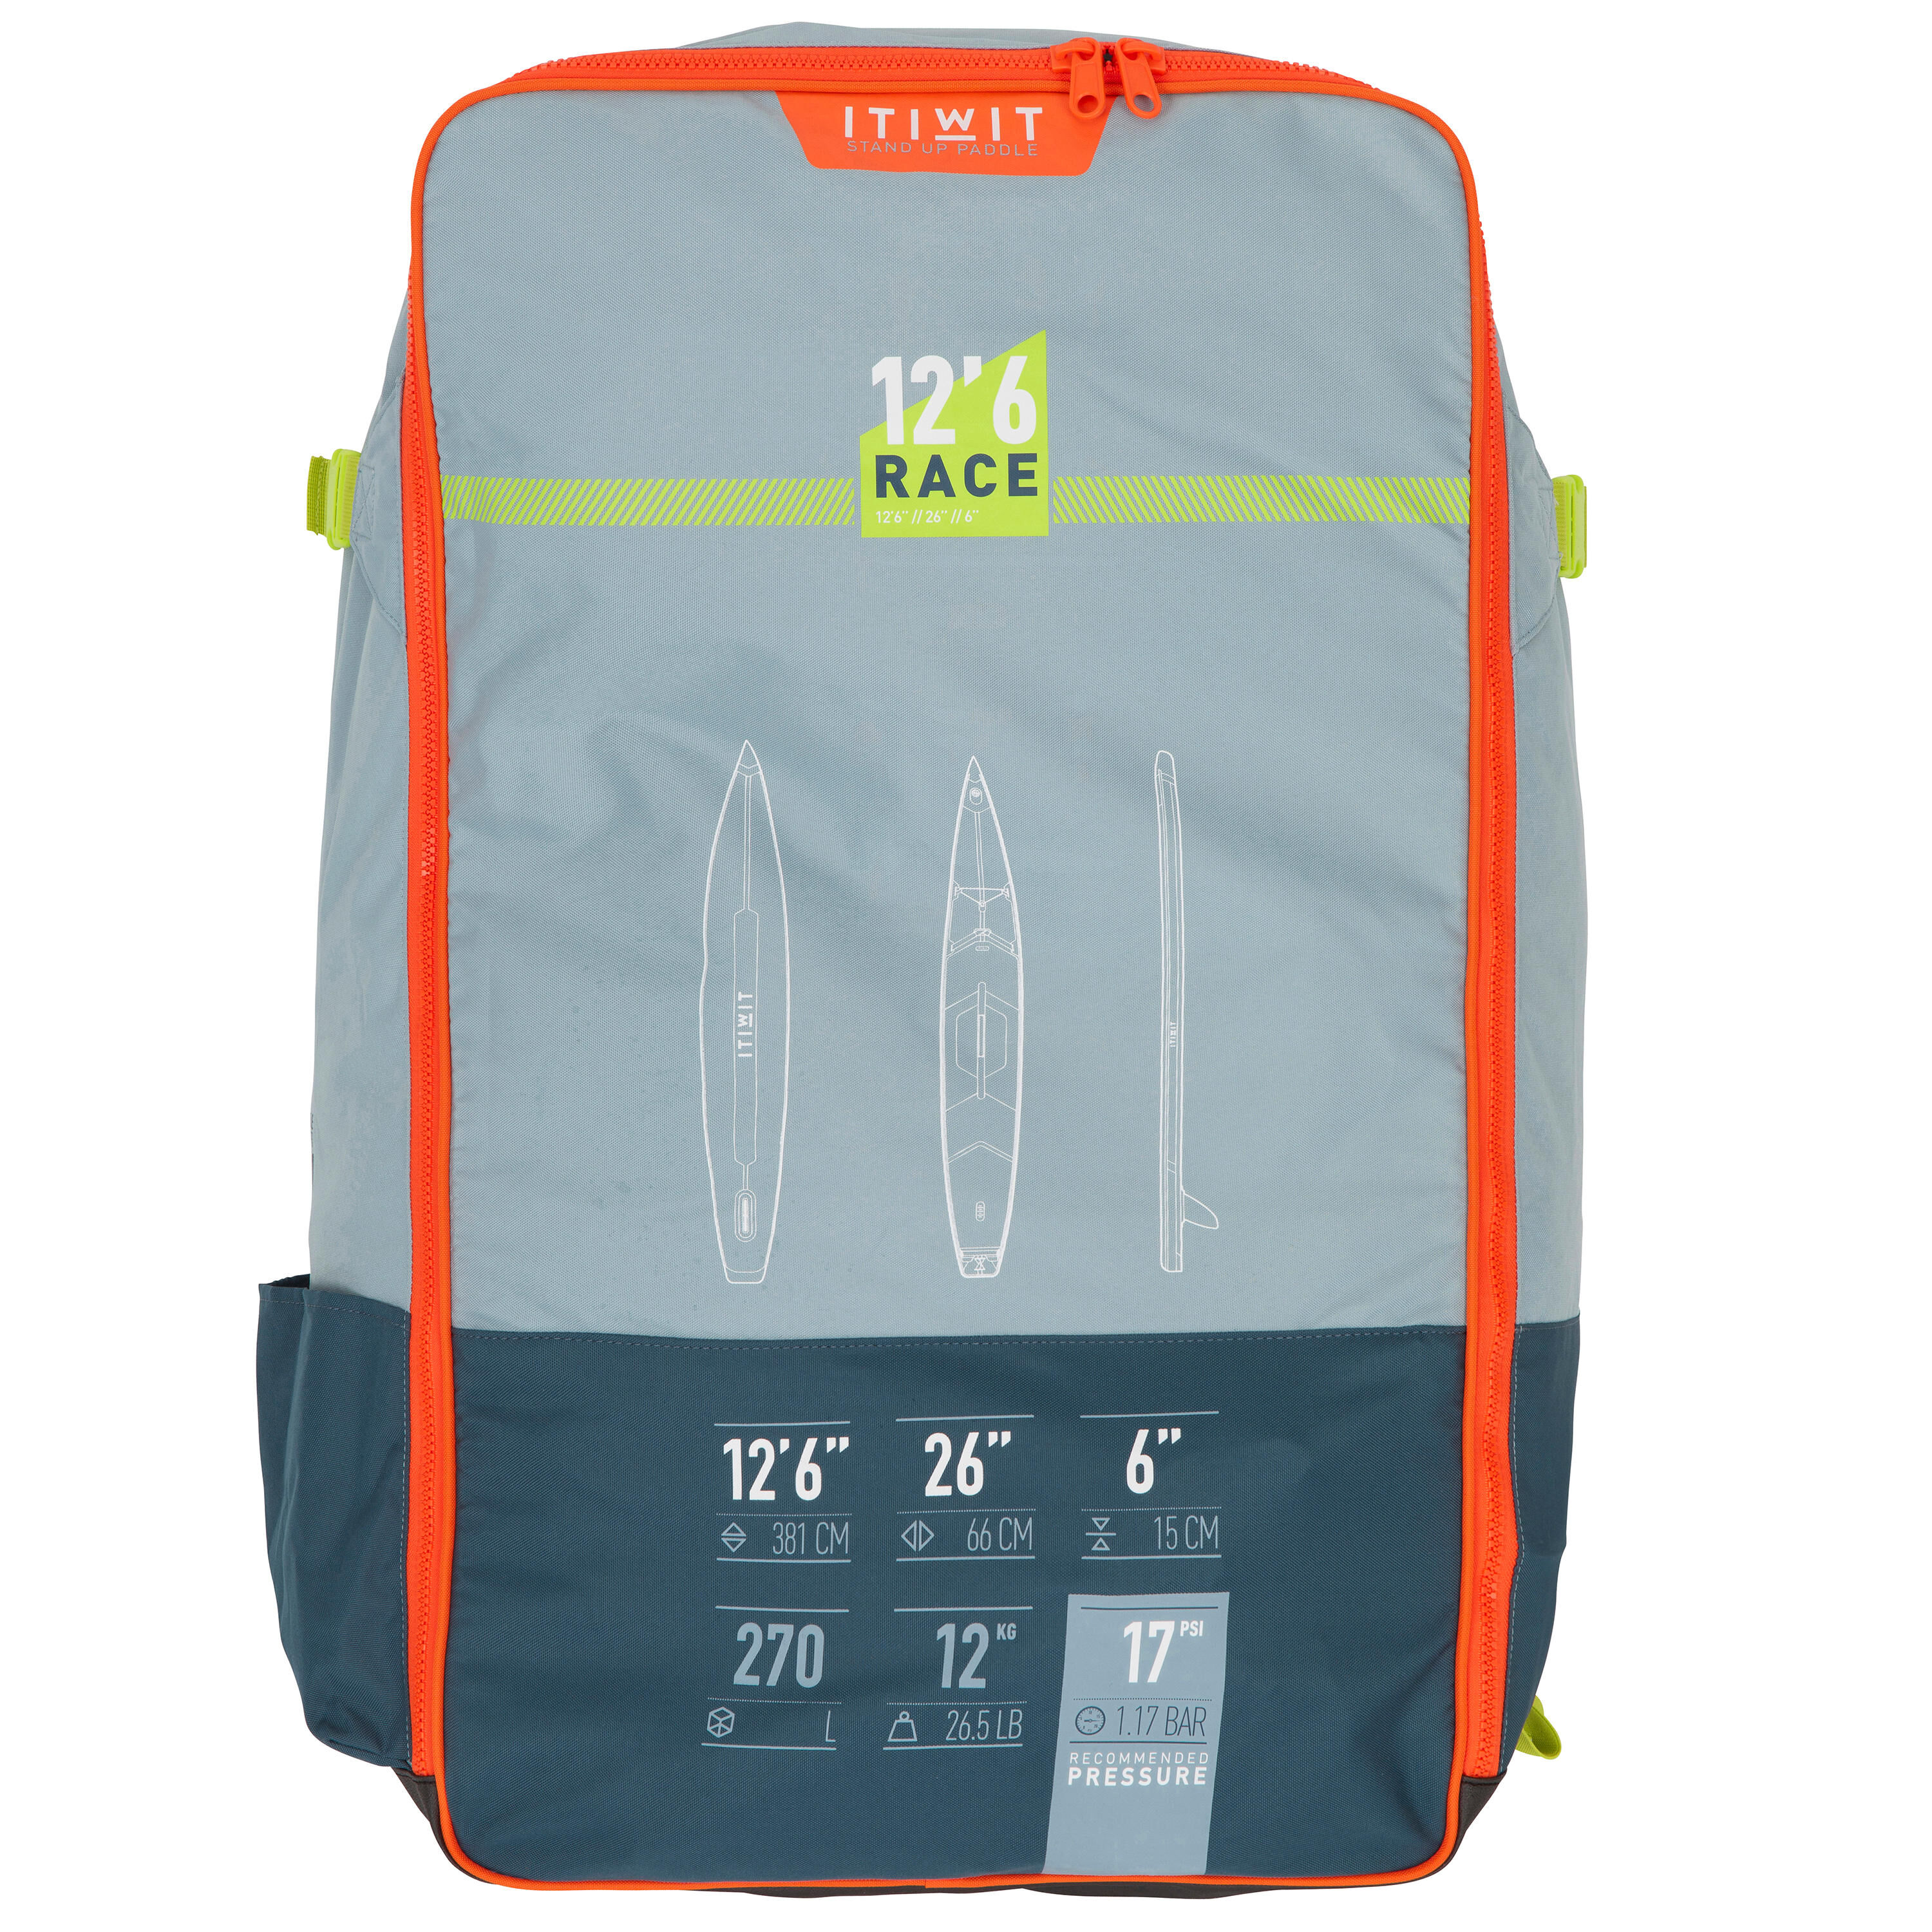 ITIWIT INFLATABLE STAND-UP PADDLEBOARD CARRY BAG ITIWIT RACE 12’6